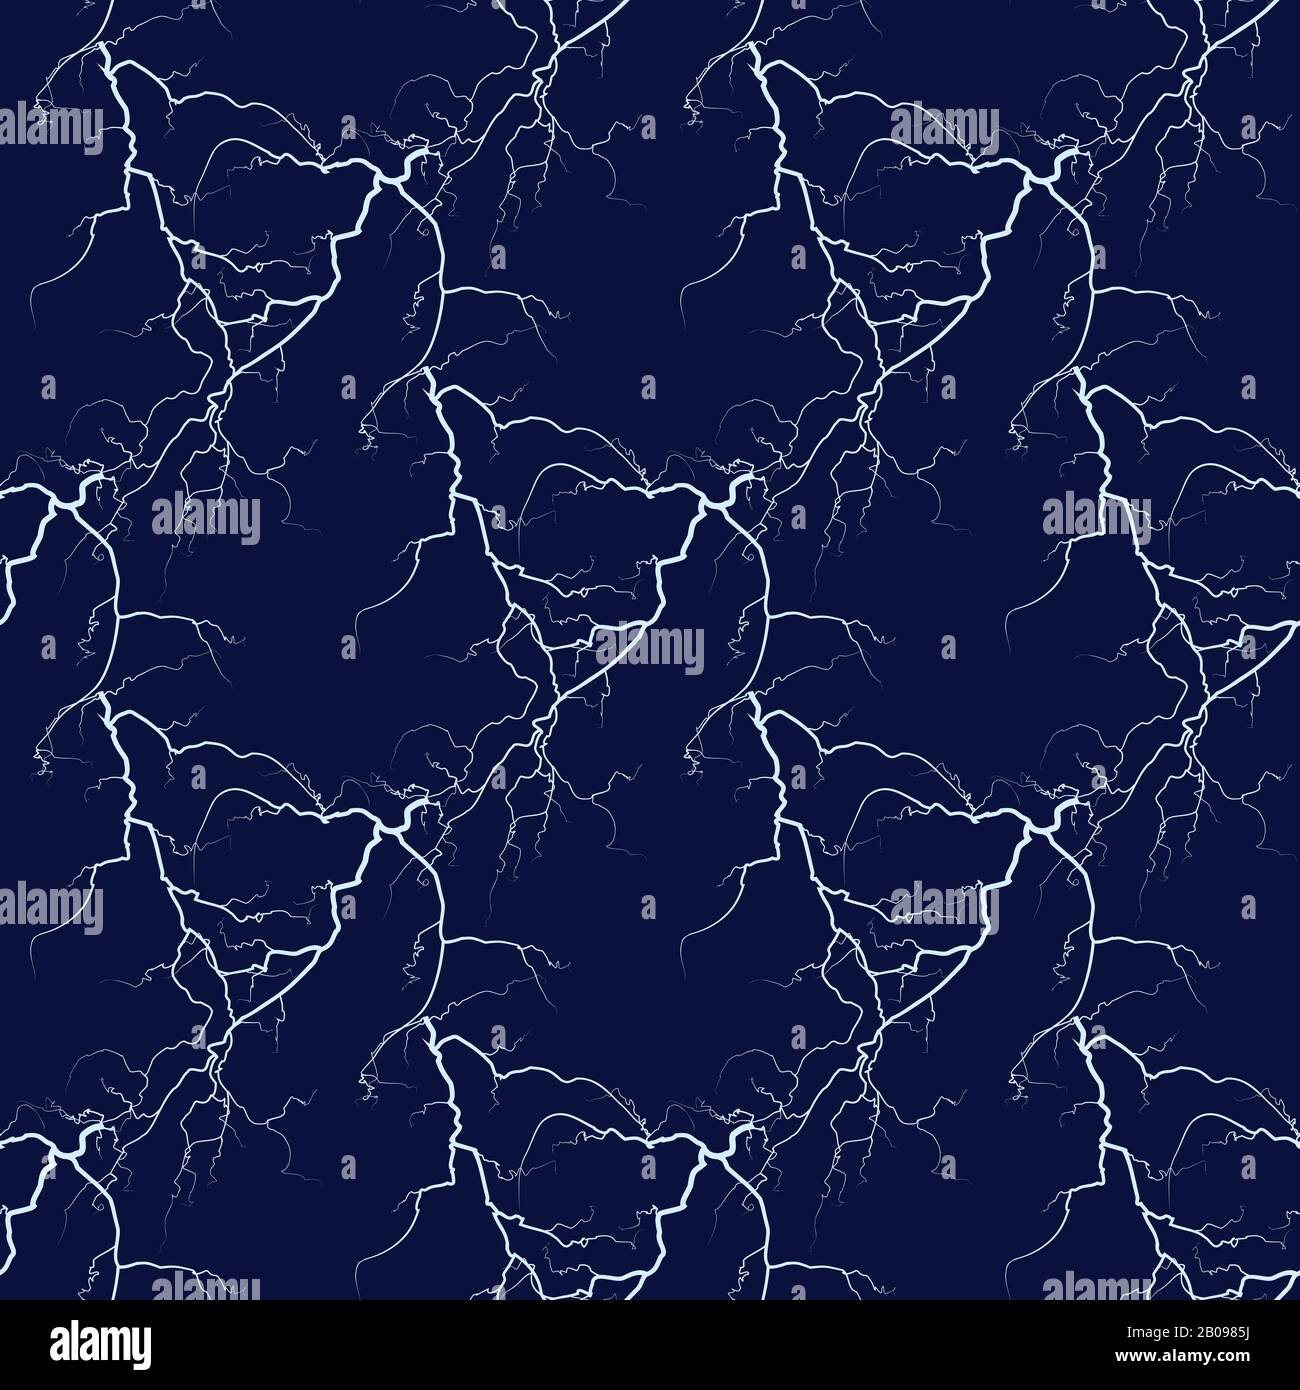 Download Weather With Lightning Bolts Wallpaper